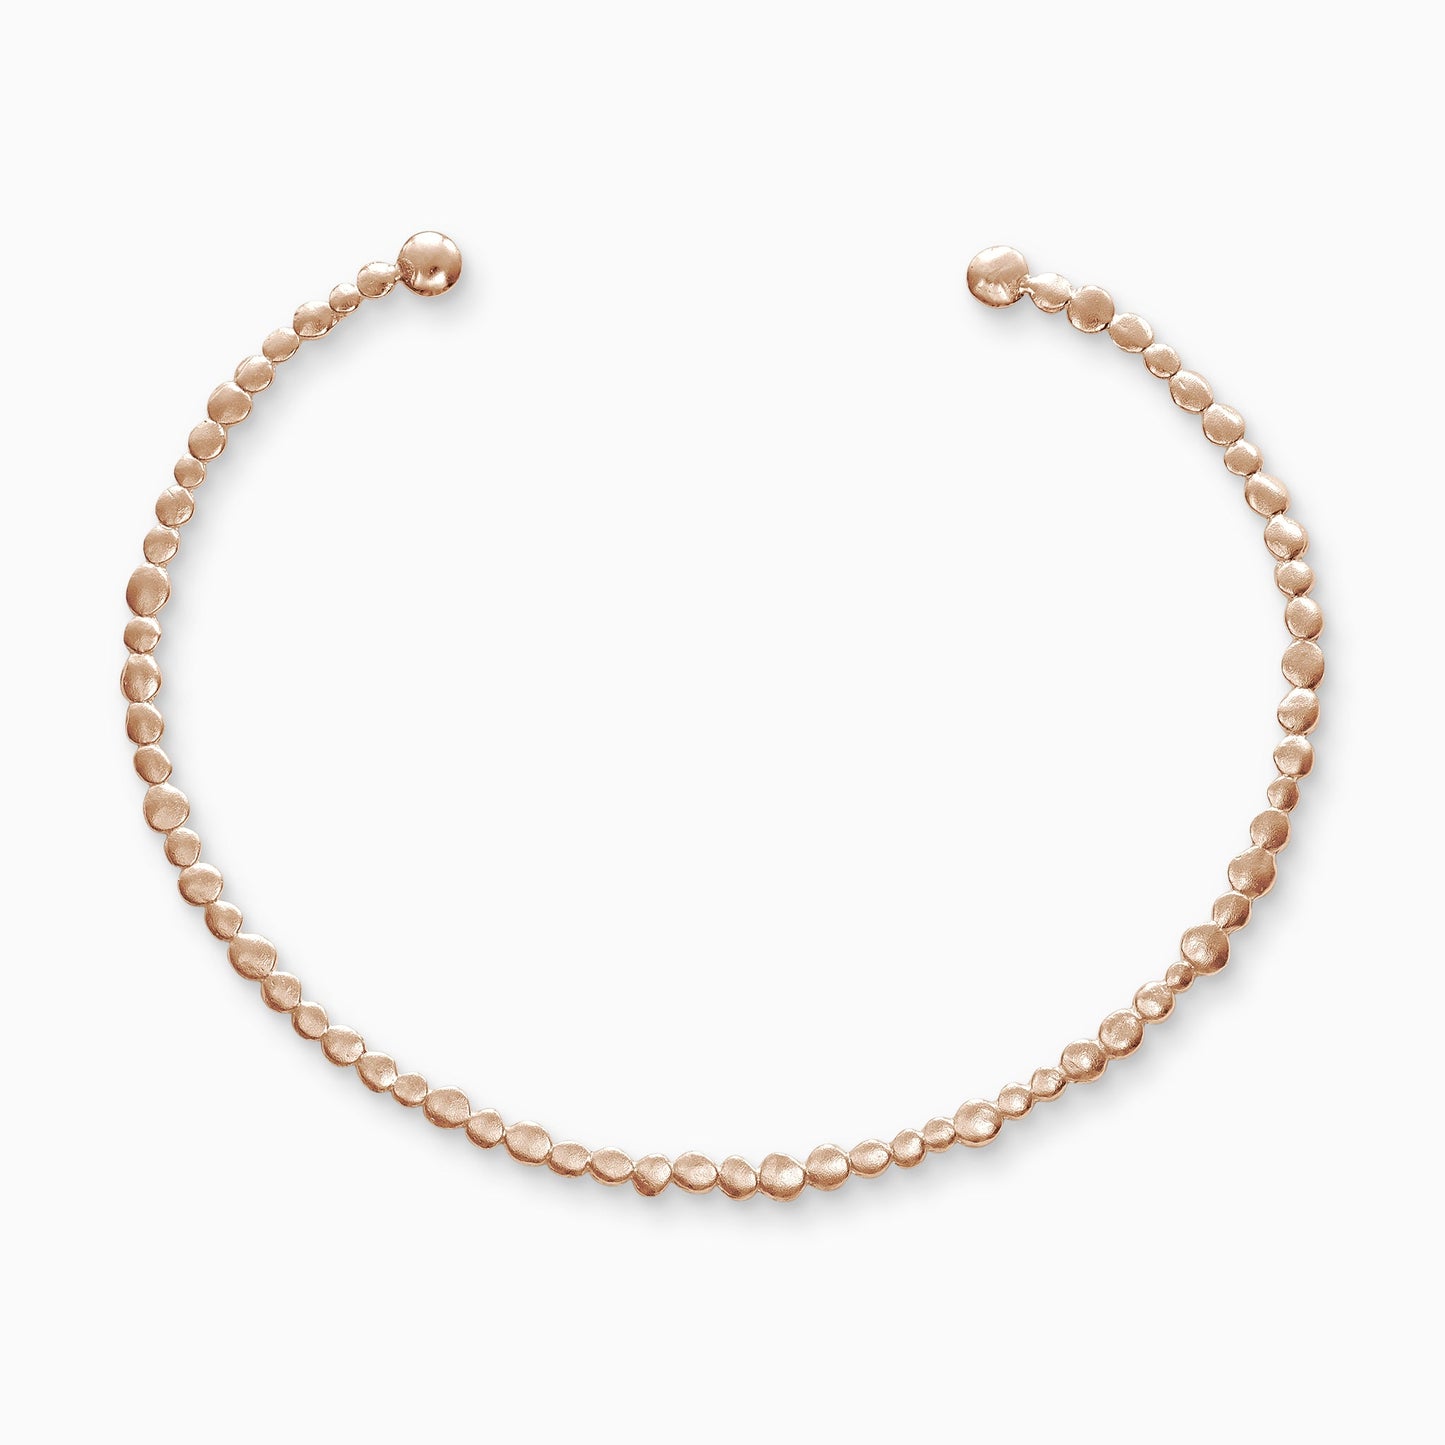 18ct Fairtrade rose gold collar. A line of dainty textured dots of gold in varying sizes form a collar worn close to the neck. Open ended to enable taking on and off. 125mm x 100mm